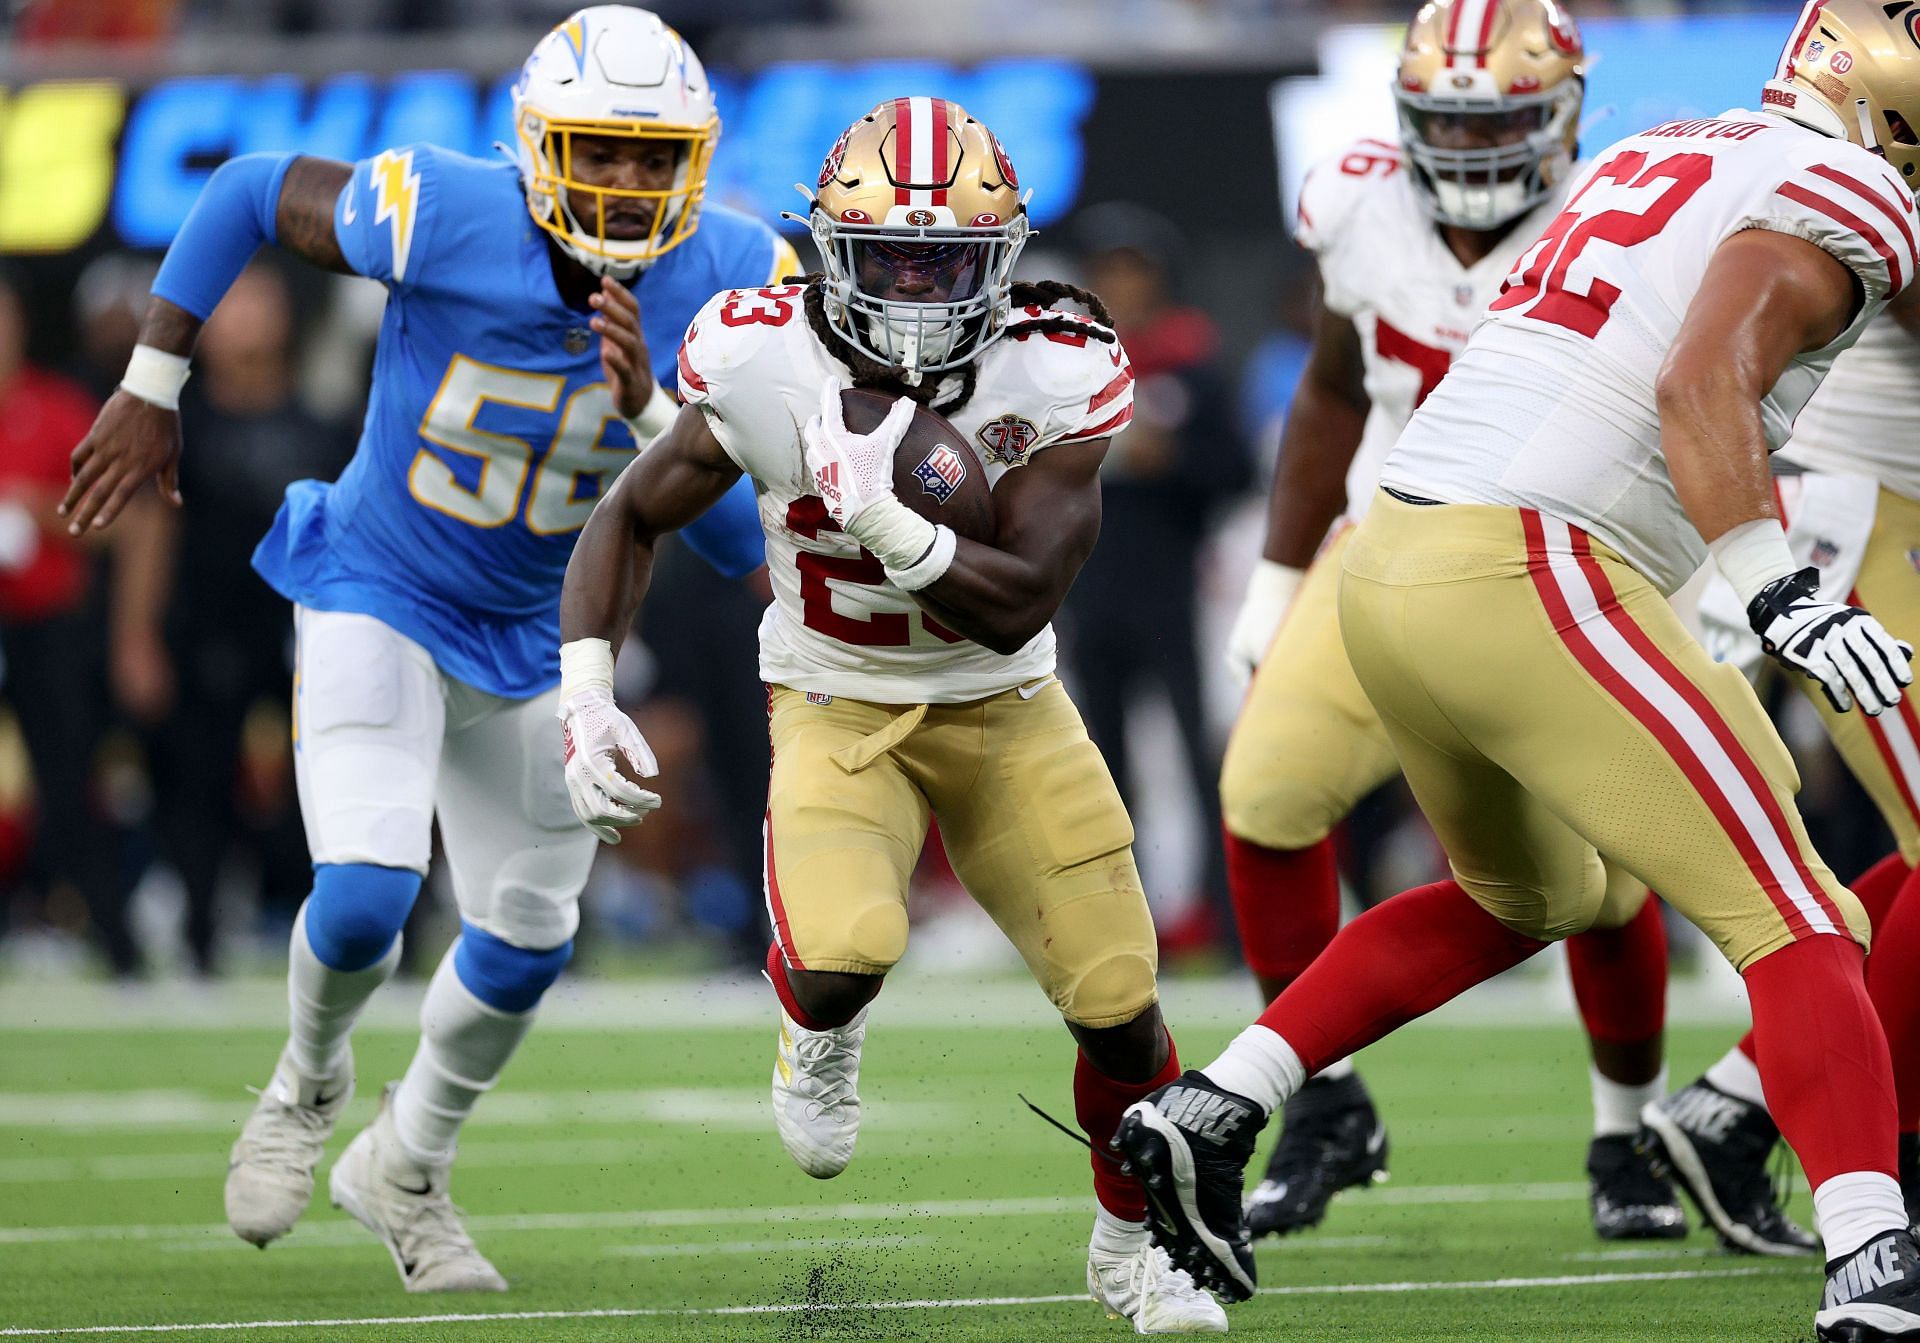 San Francisco 49ers v Los Angeles Chargers